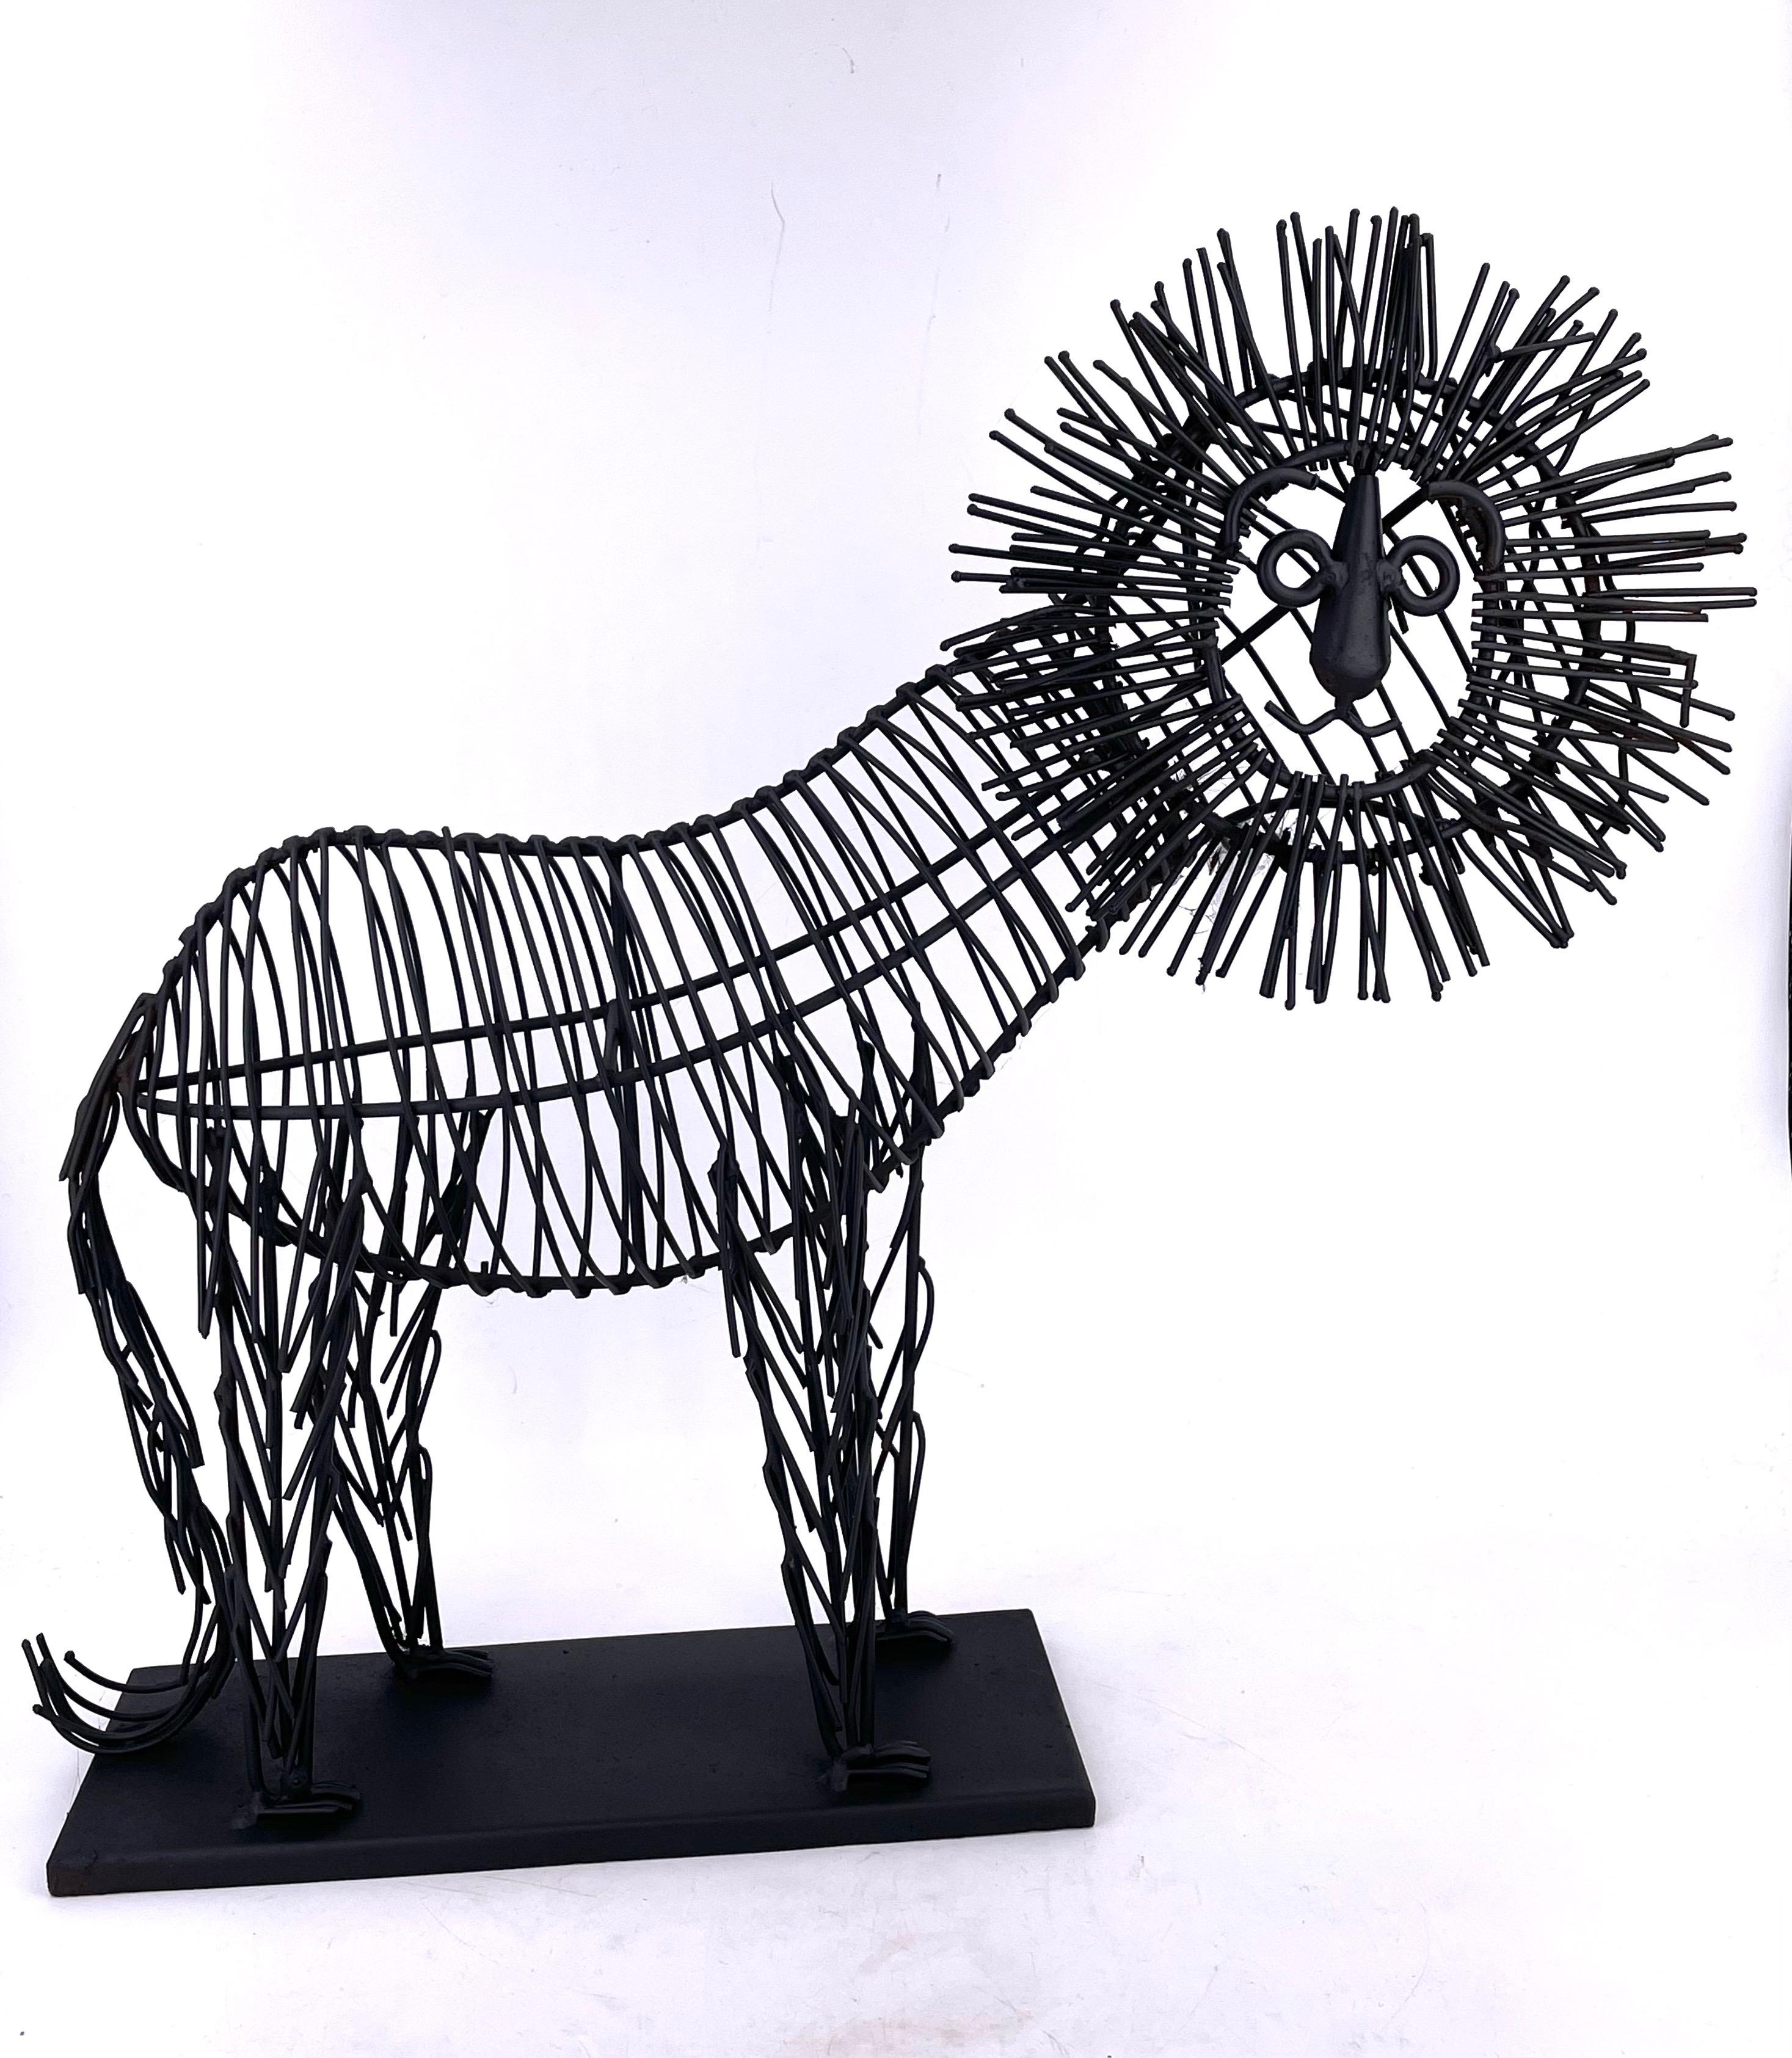 Fun, metal wire sculpture of a male lion sitting on a black metal base. The body is a black painted metal wire. The piece is unsigned but in the style of C. Jere, circa 1980s. Sergio.